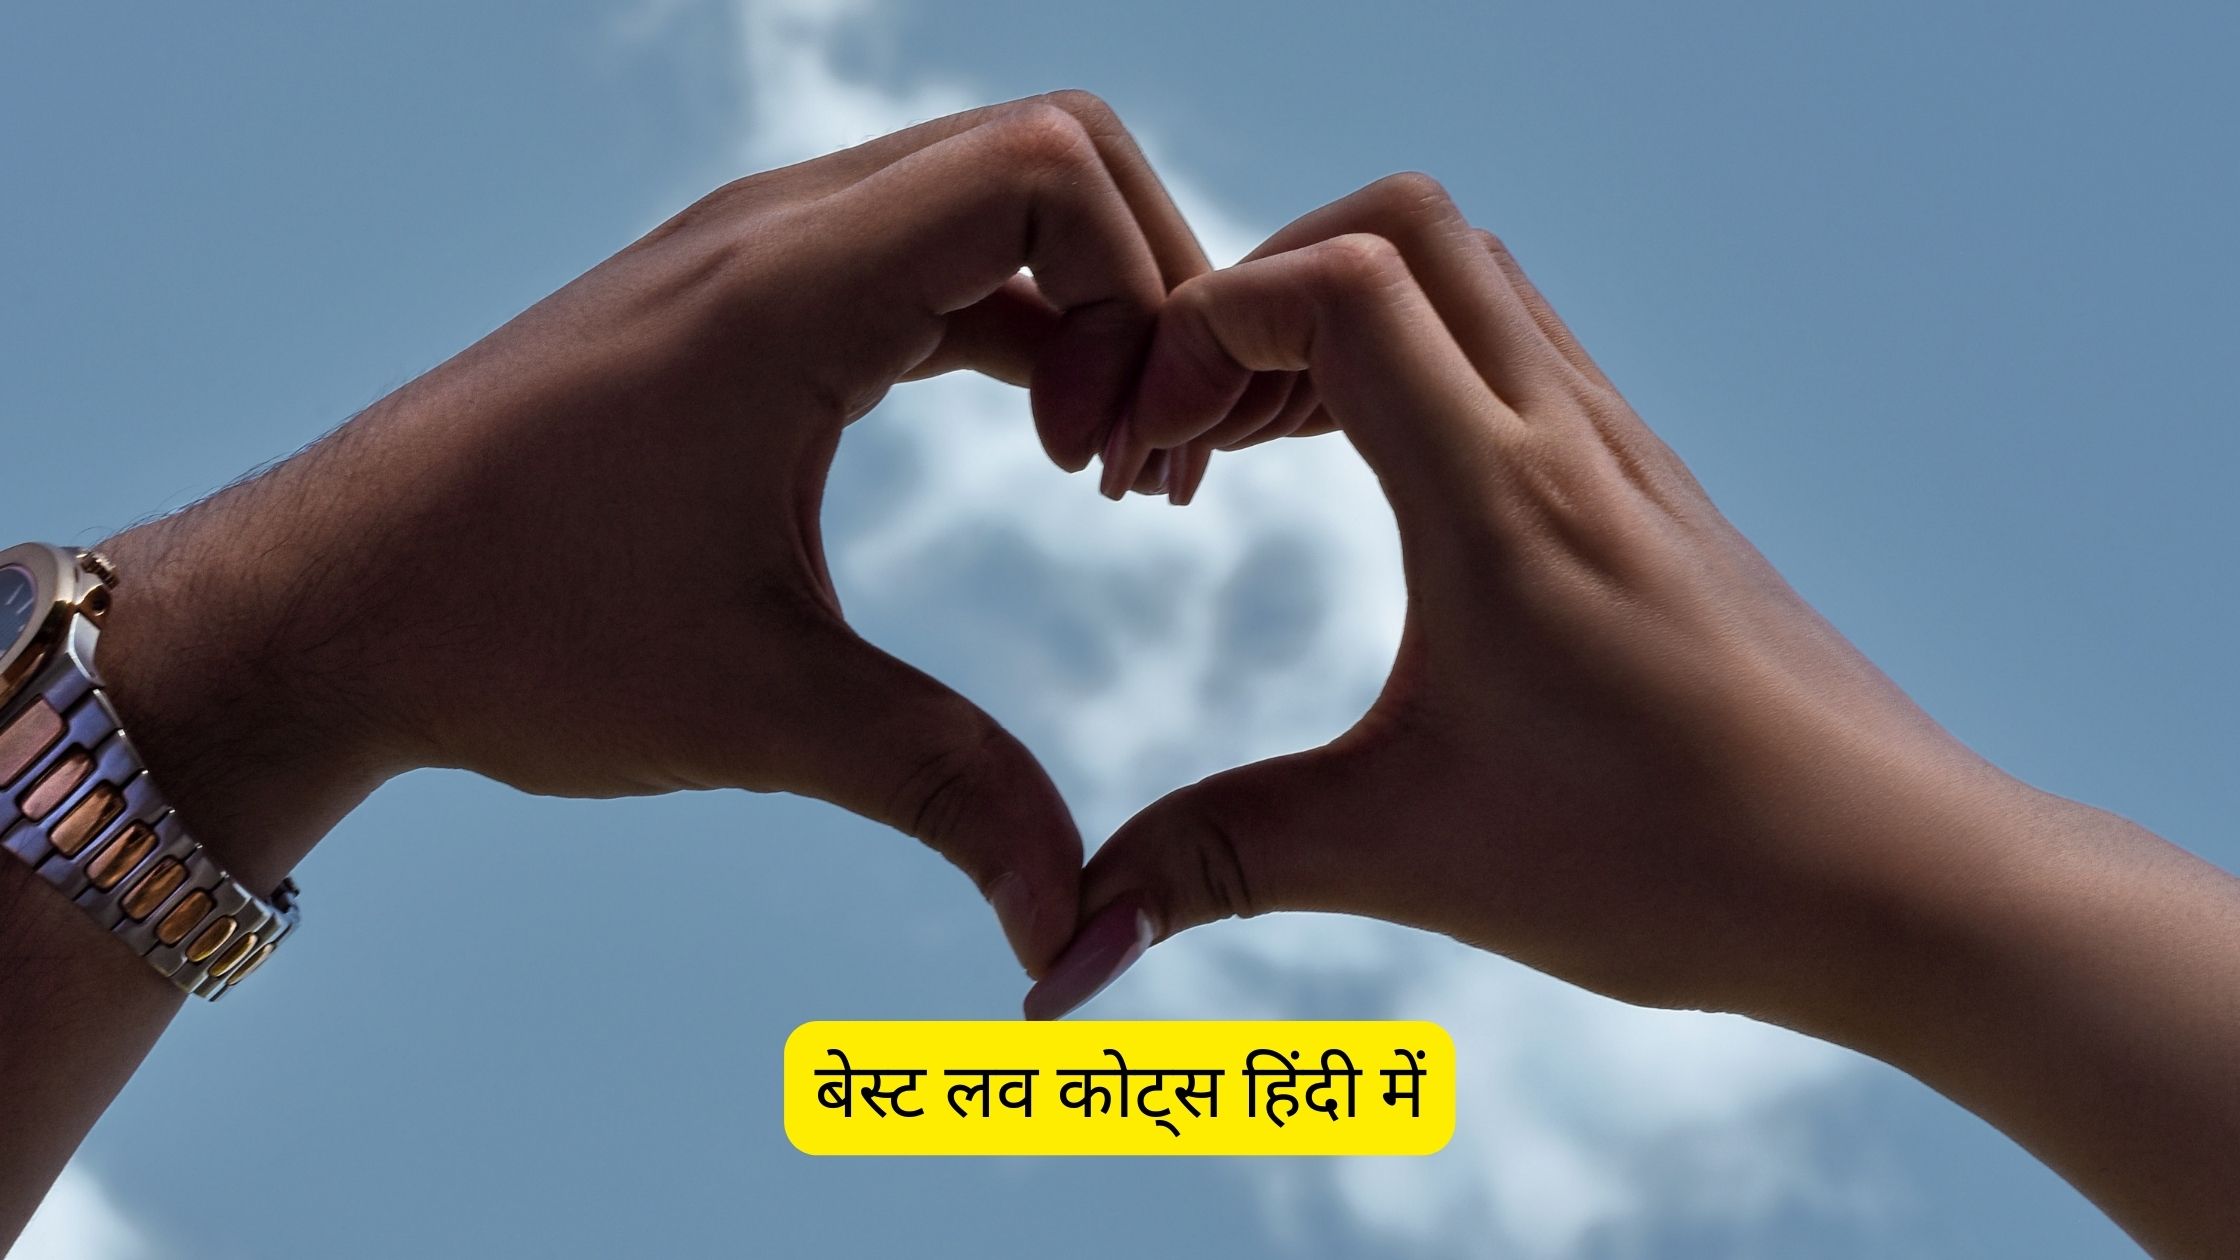 Love quotes in Hindi